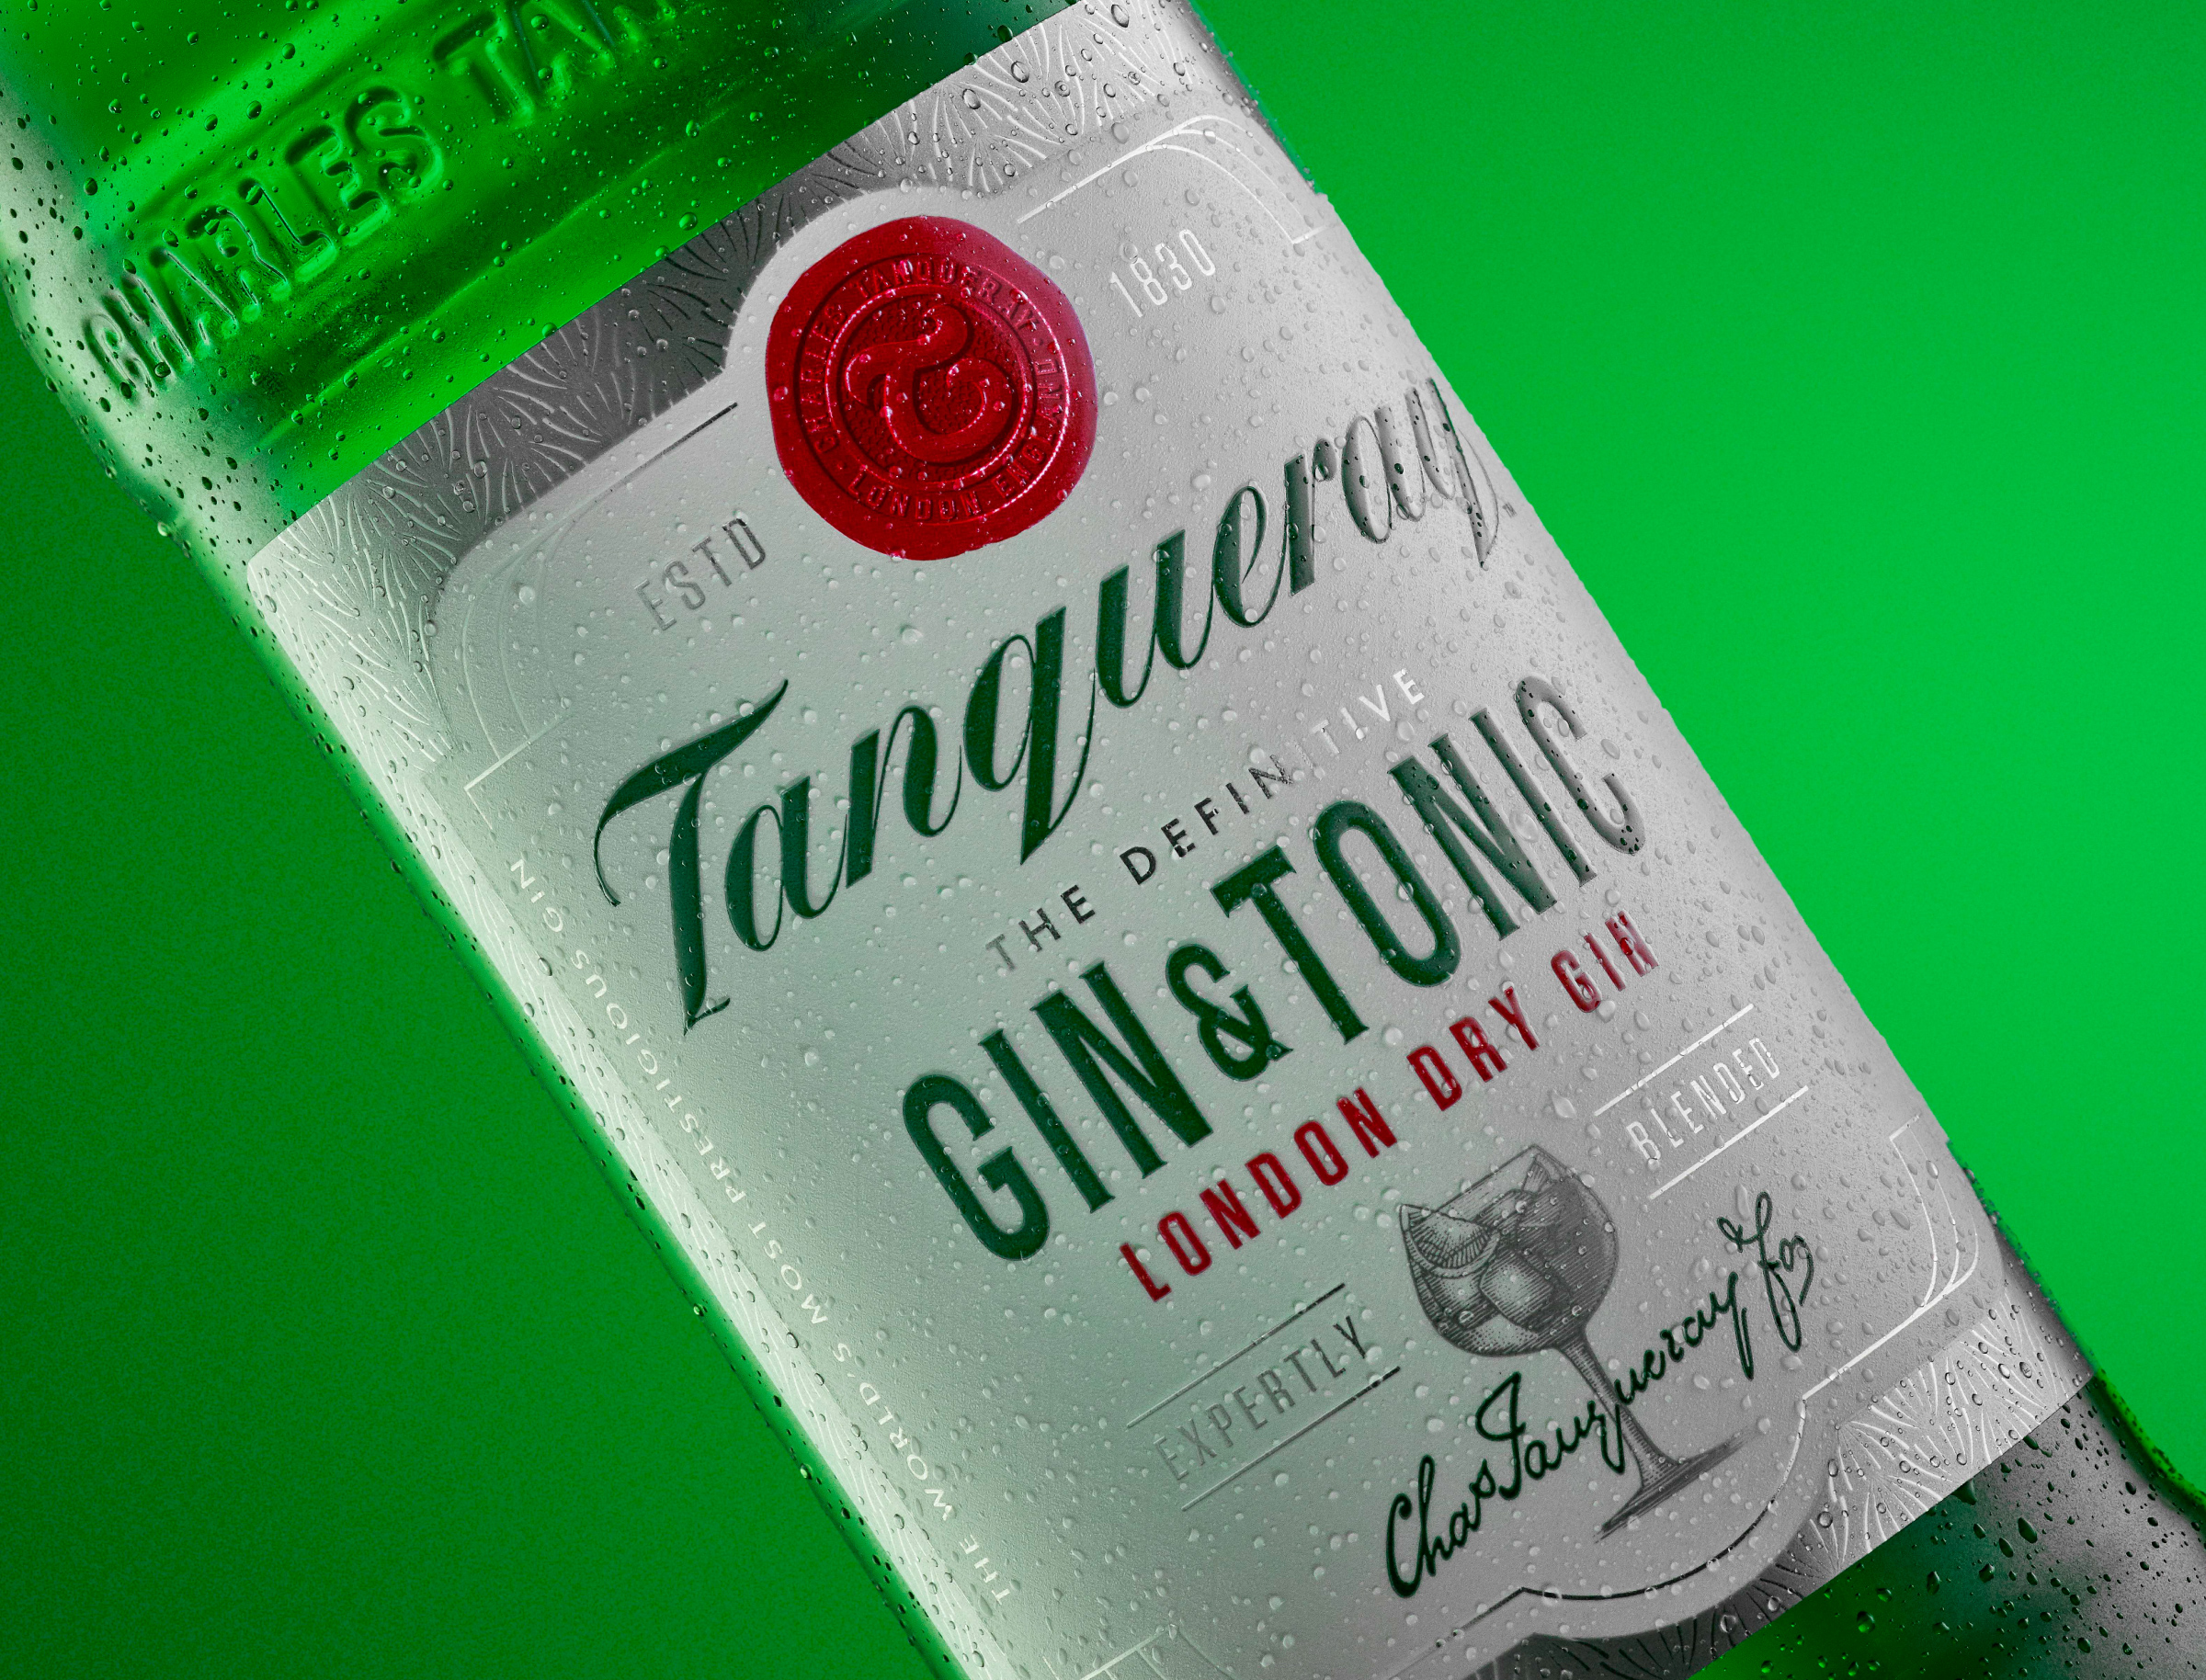 New Benchmark for Premium Premixes, the Definitive Gin and Tonic